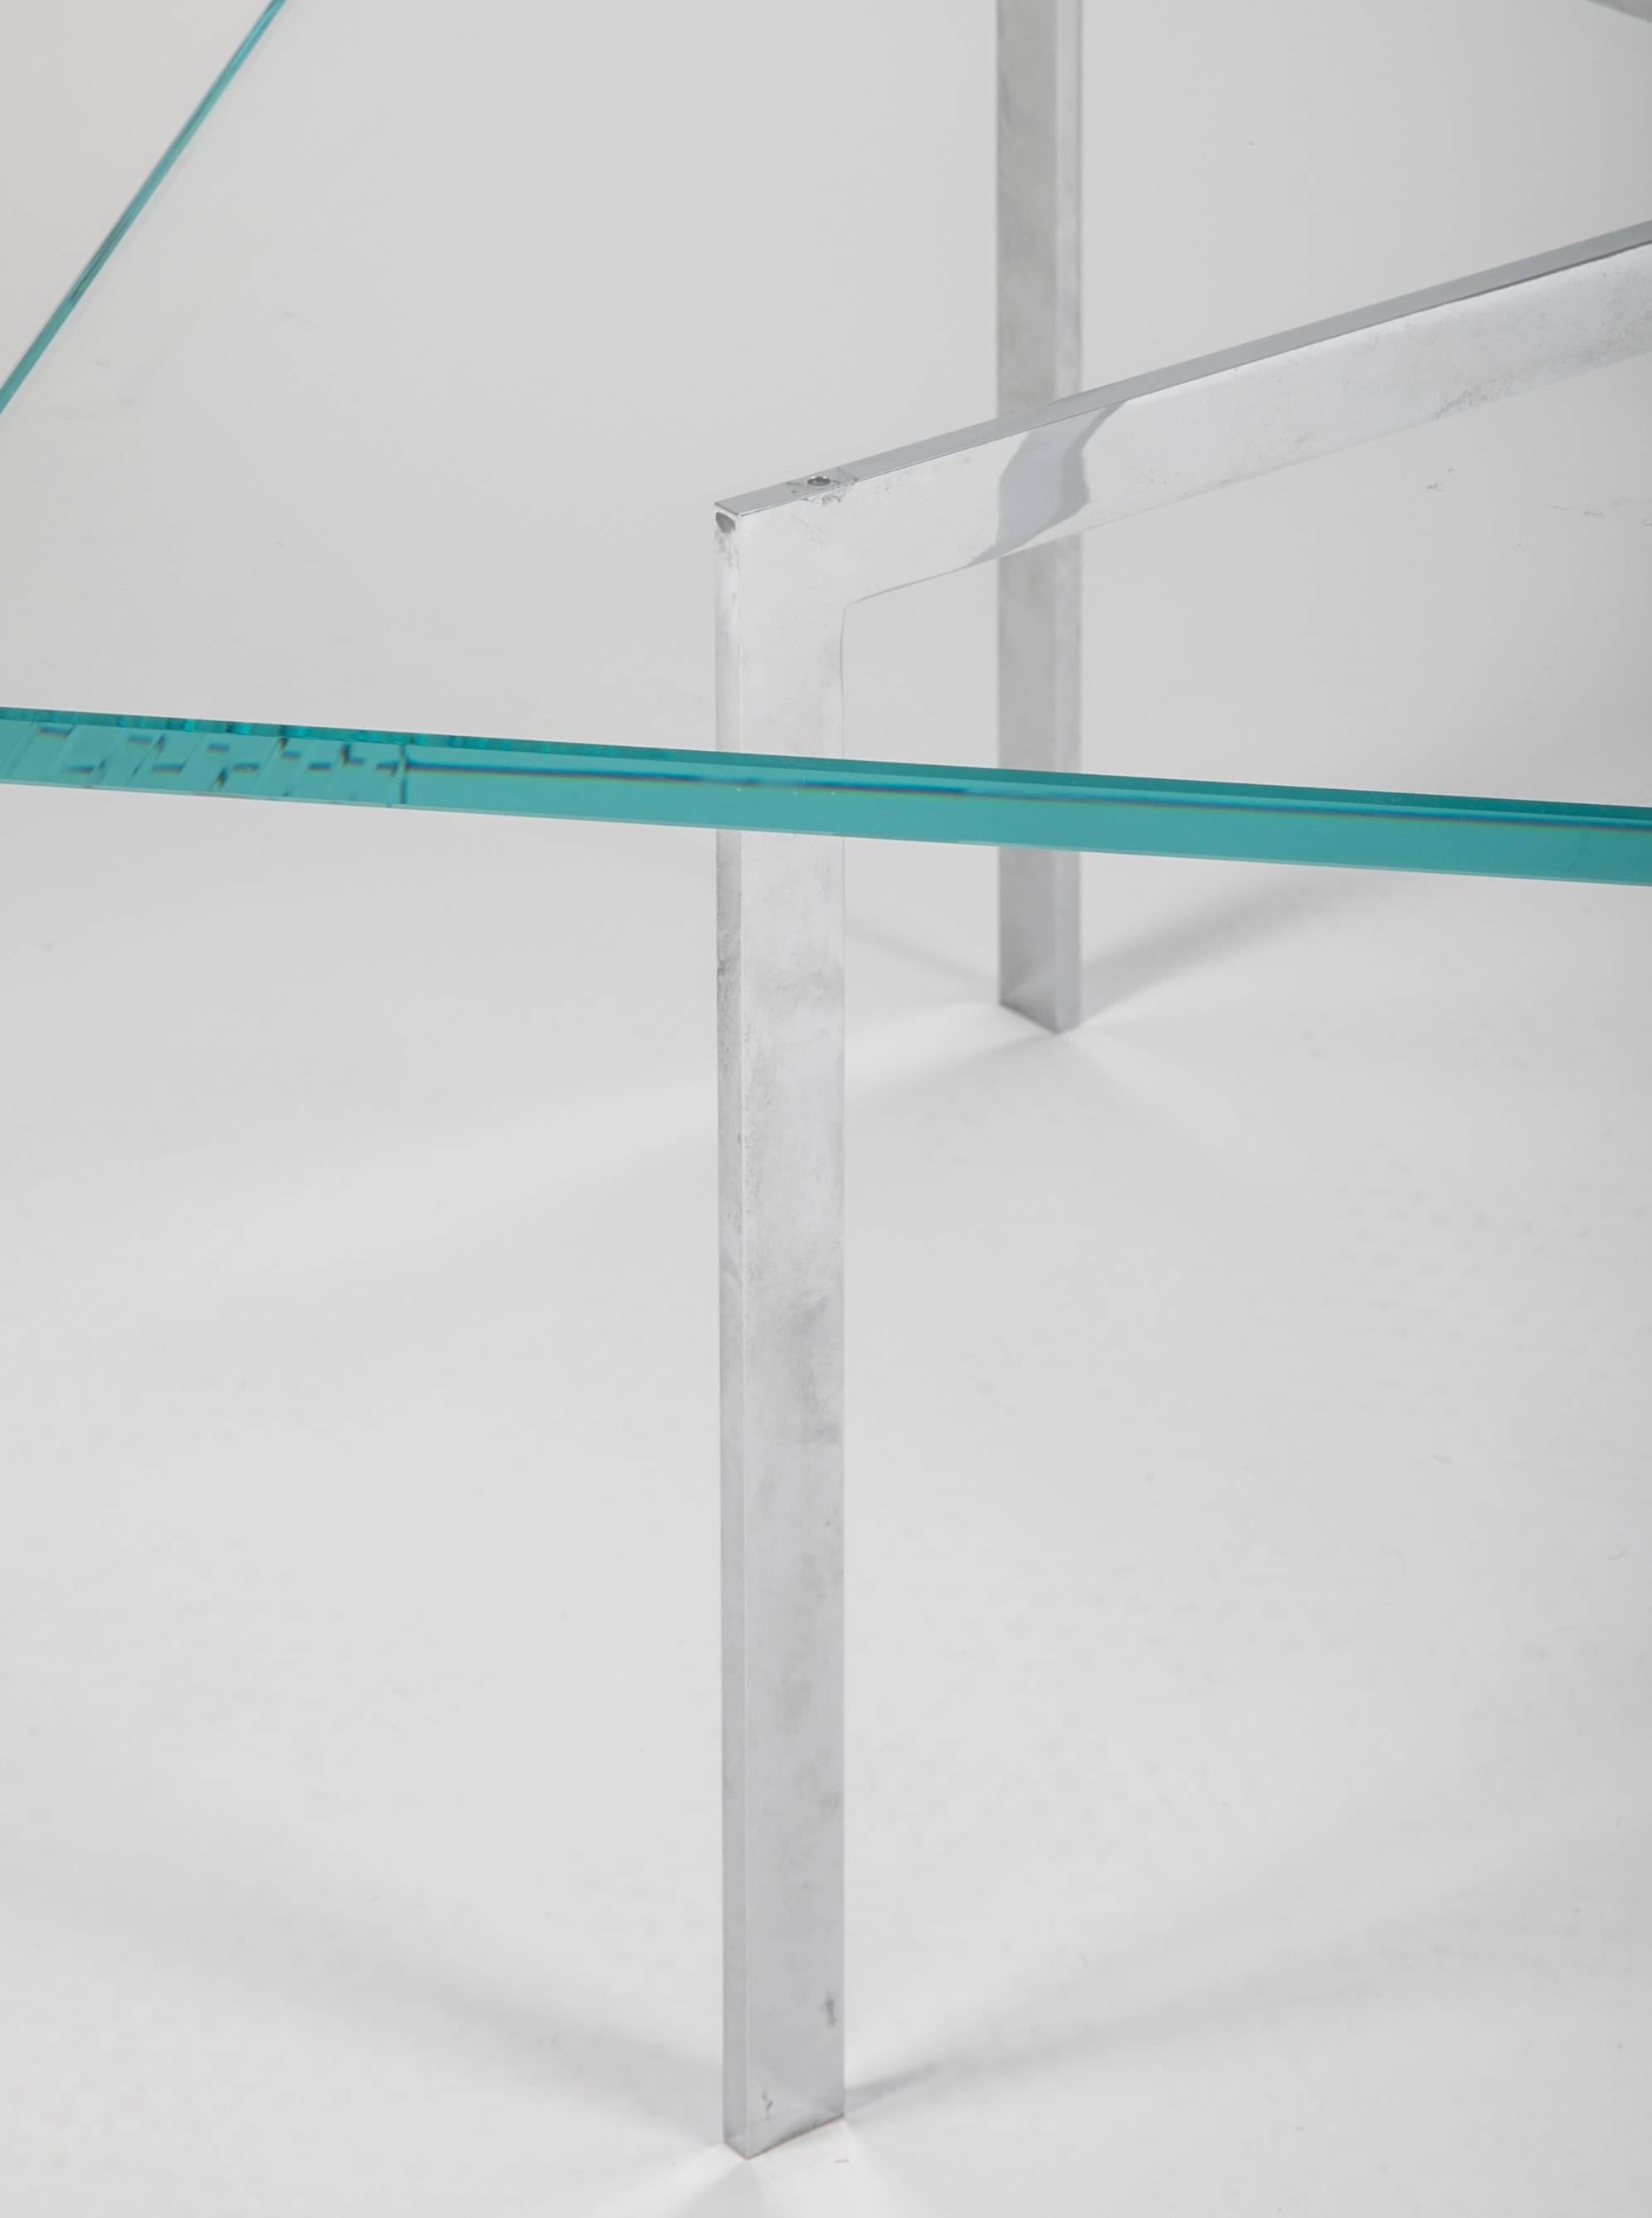 Iconic Barcelona Coffee Table by Mies van der Rohe for Knoll 1